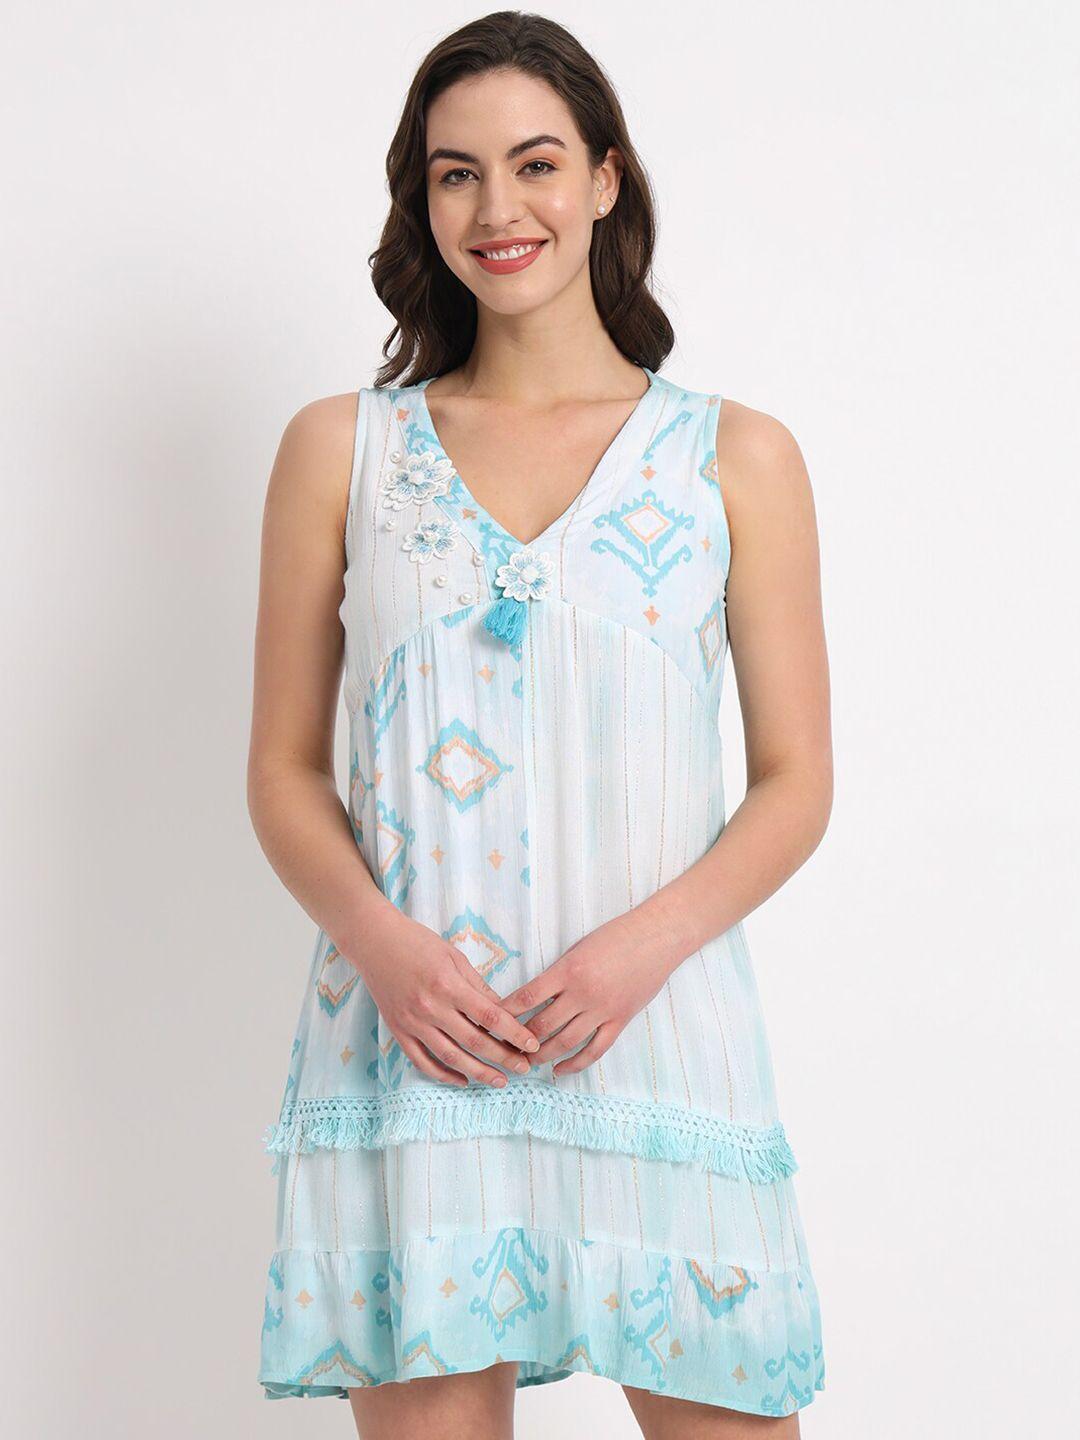 veldress-blue-floral-embroidered-fit-&-flare-mini-dress